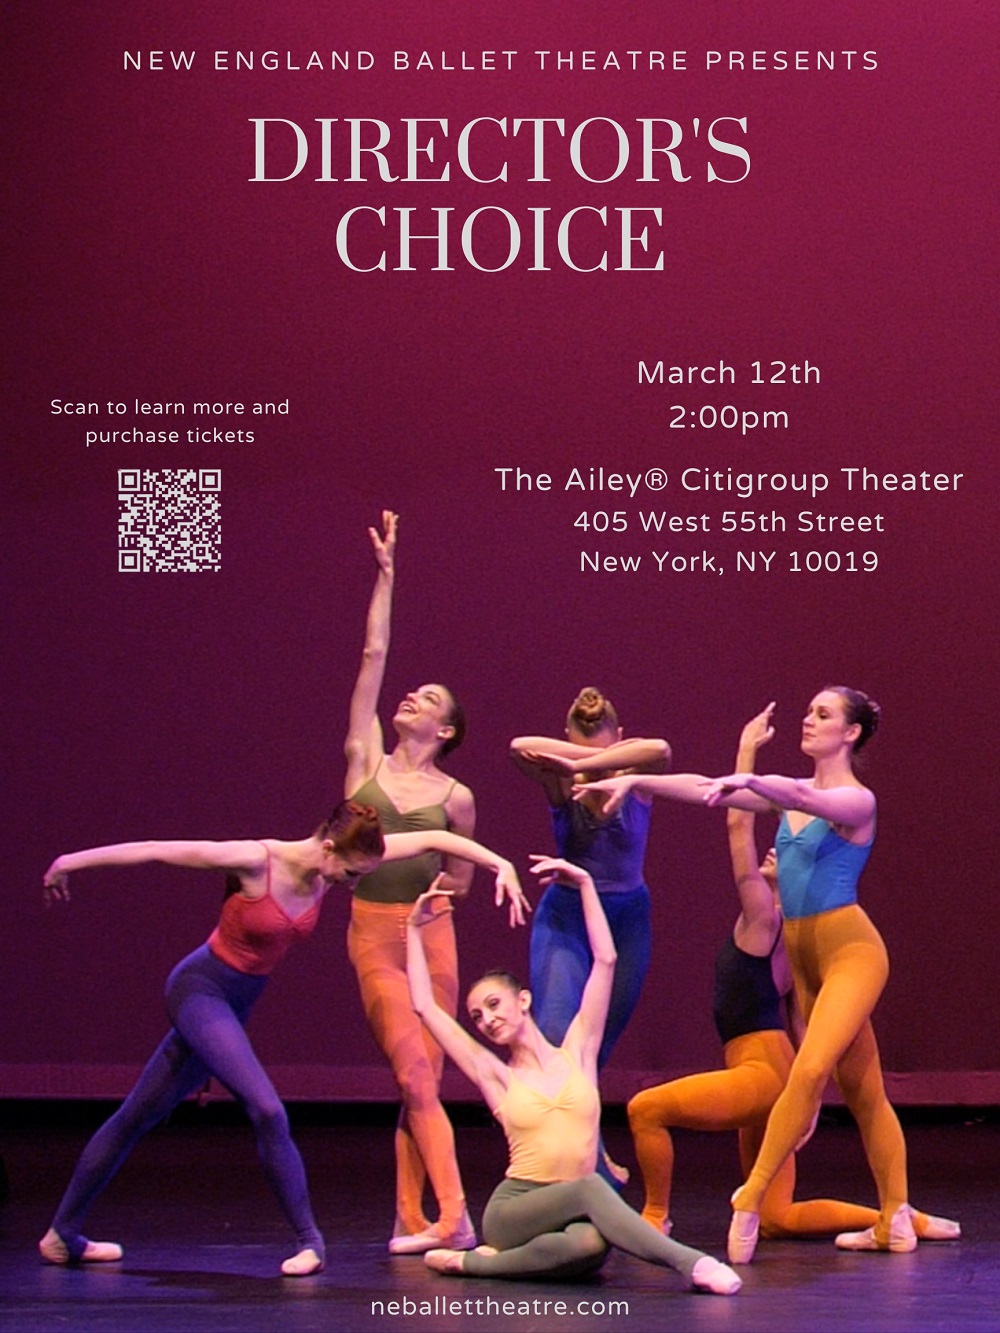 <strong>New England Ballet Theatre Presents: Director’s Choice</strong>